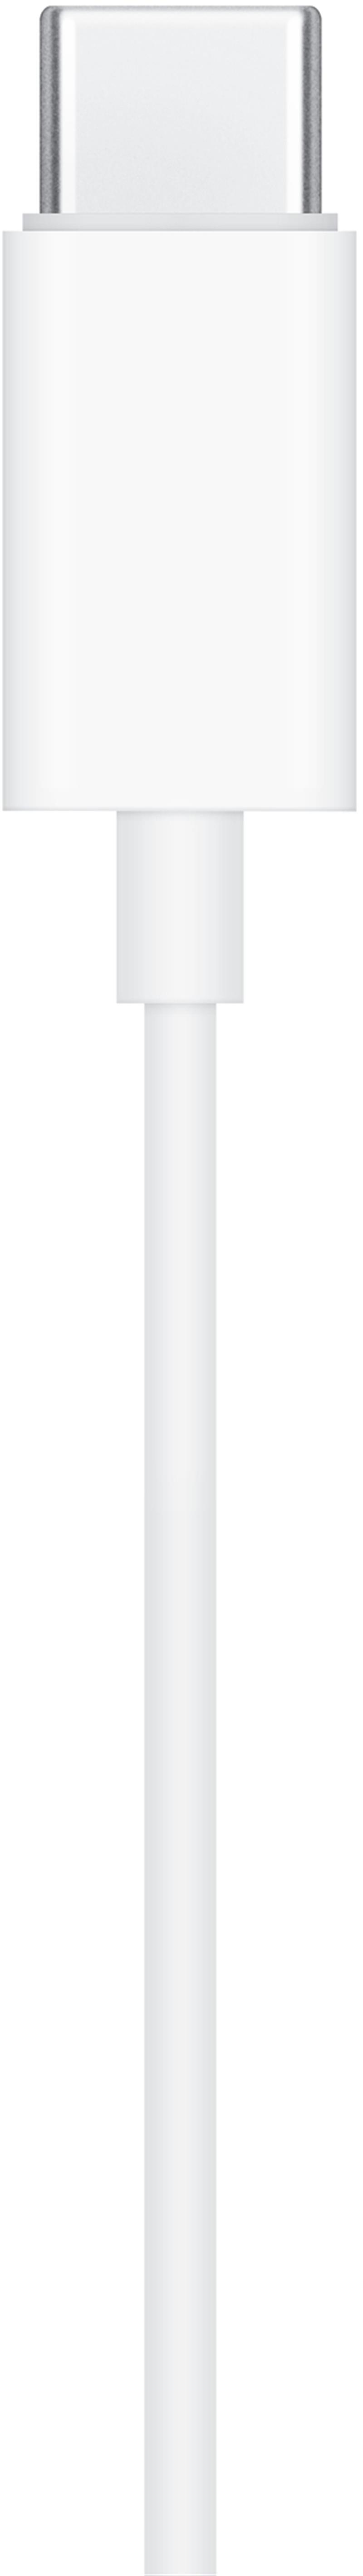 Apple Earpods with USB-C Connector White